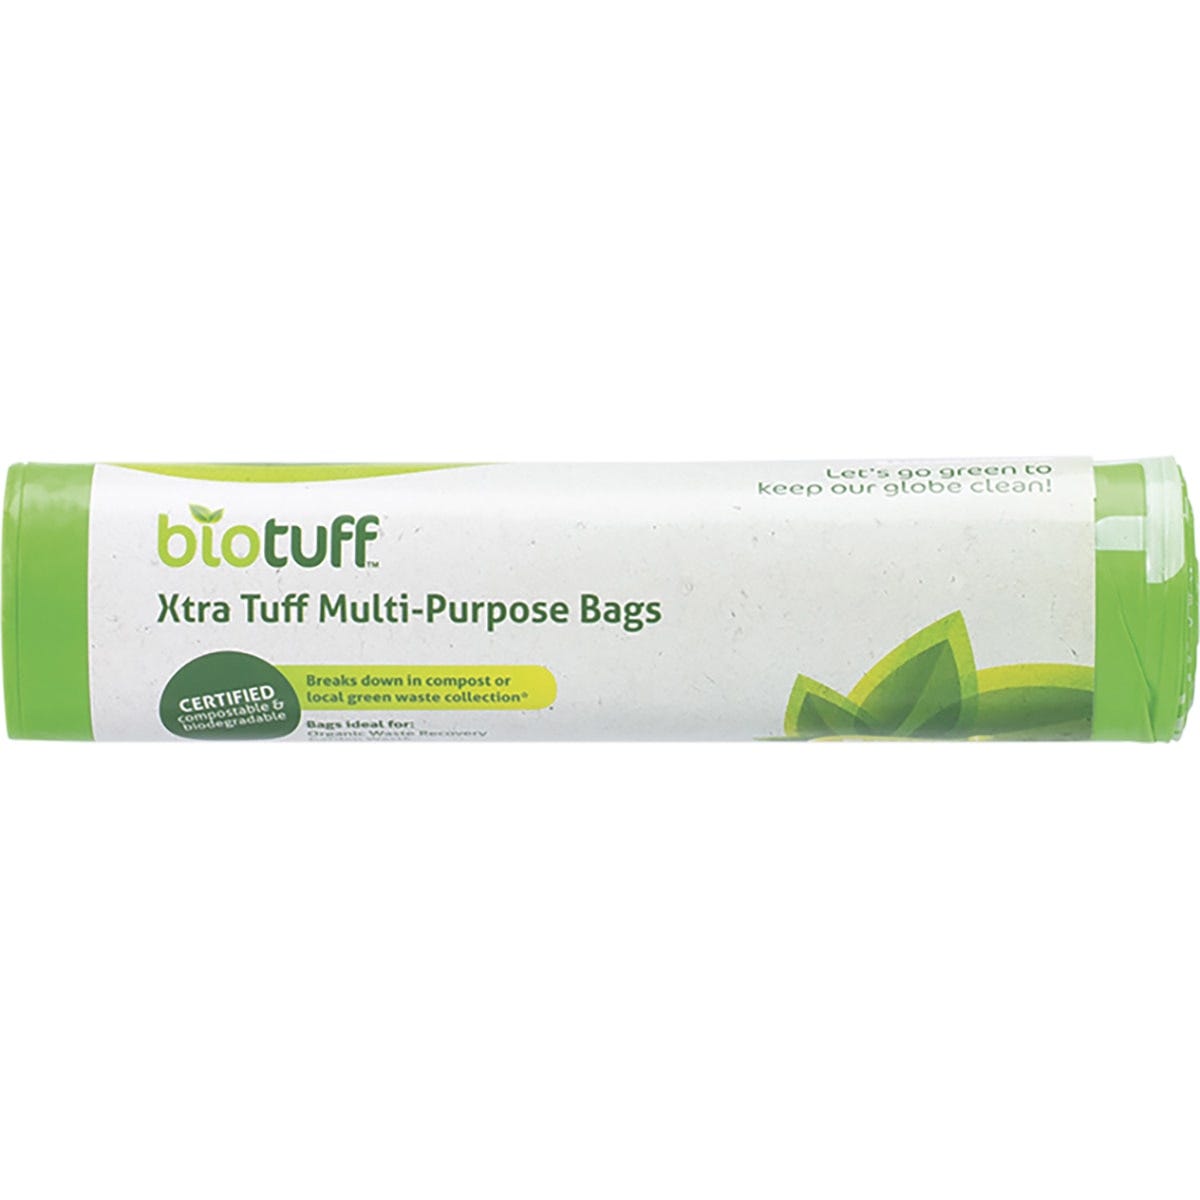 Biotuff Xtra Tuff Multi-Purpose Bags Large Bags 80L 5pk - Dr Earth - Cleaning